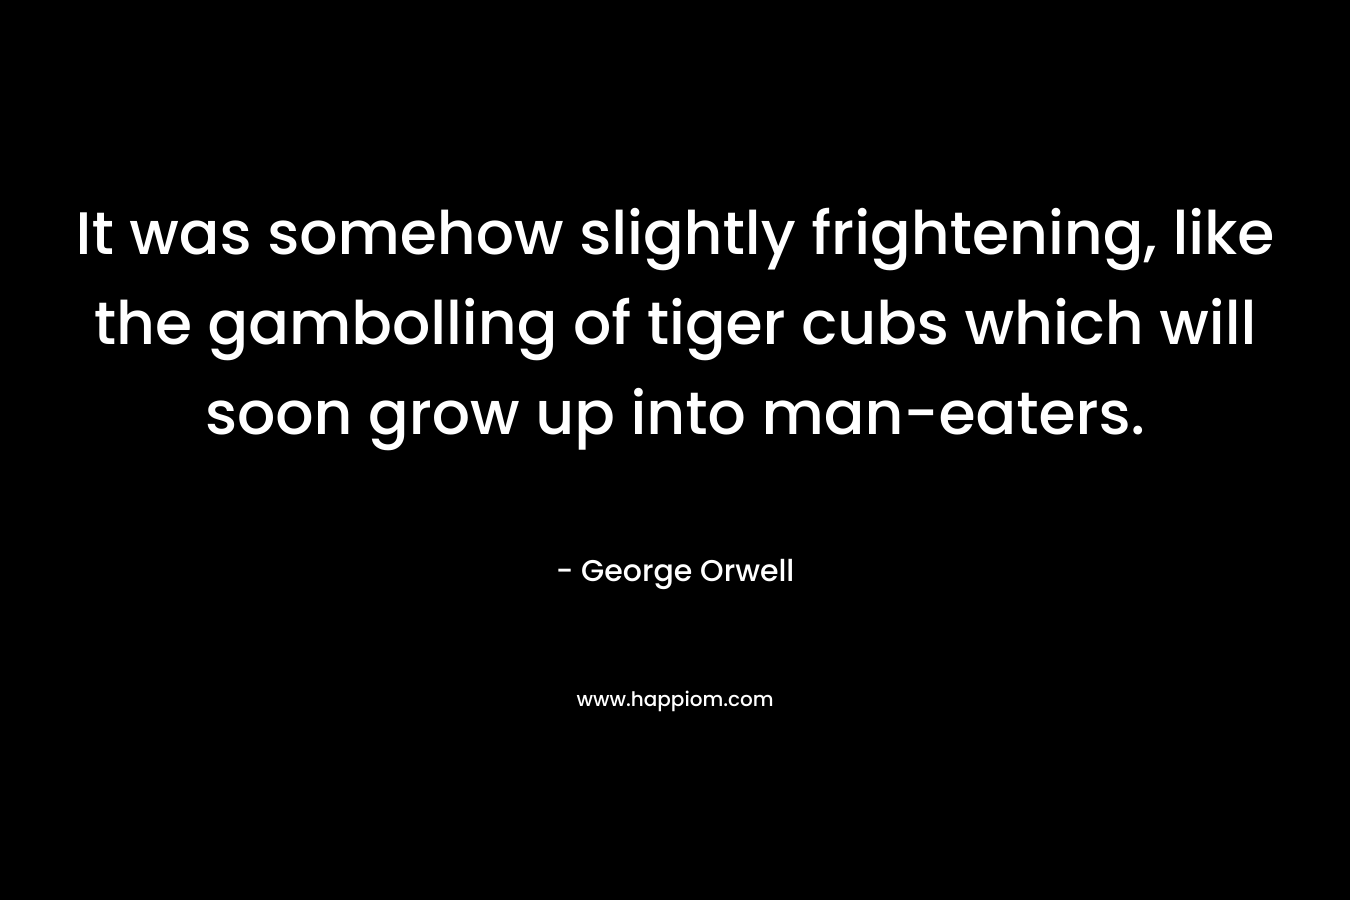 It was somehow slightly frightening, like the gambolling of tiger cubs which will soon grow up into man-eaters. – George Orwell